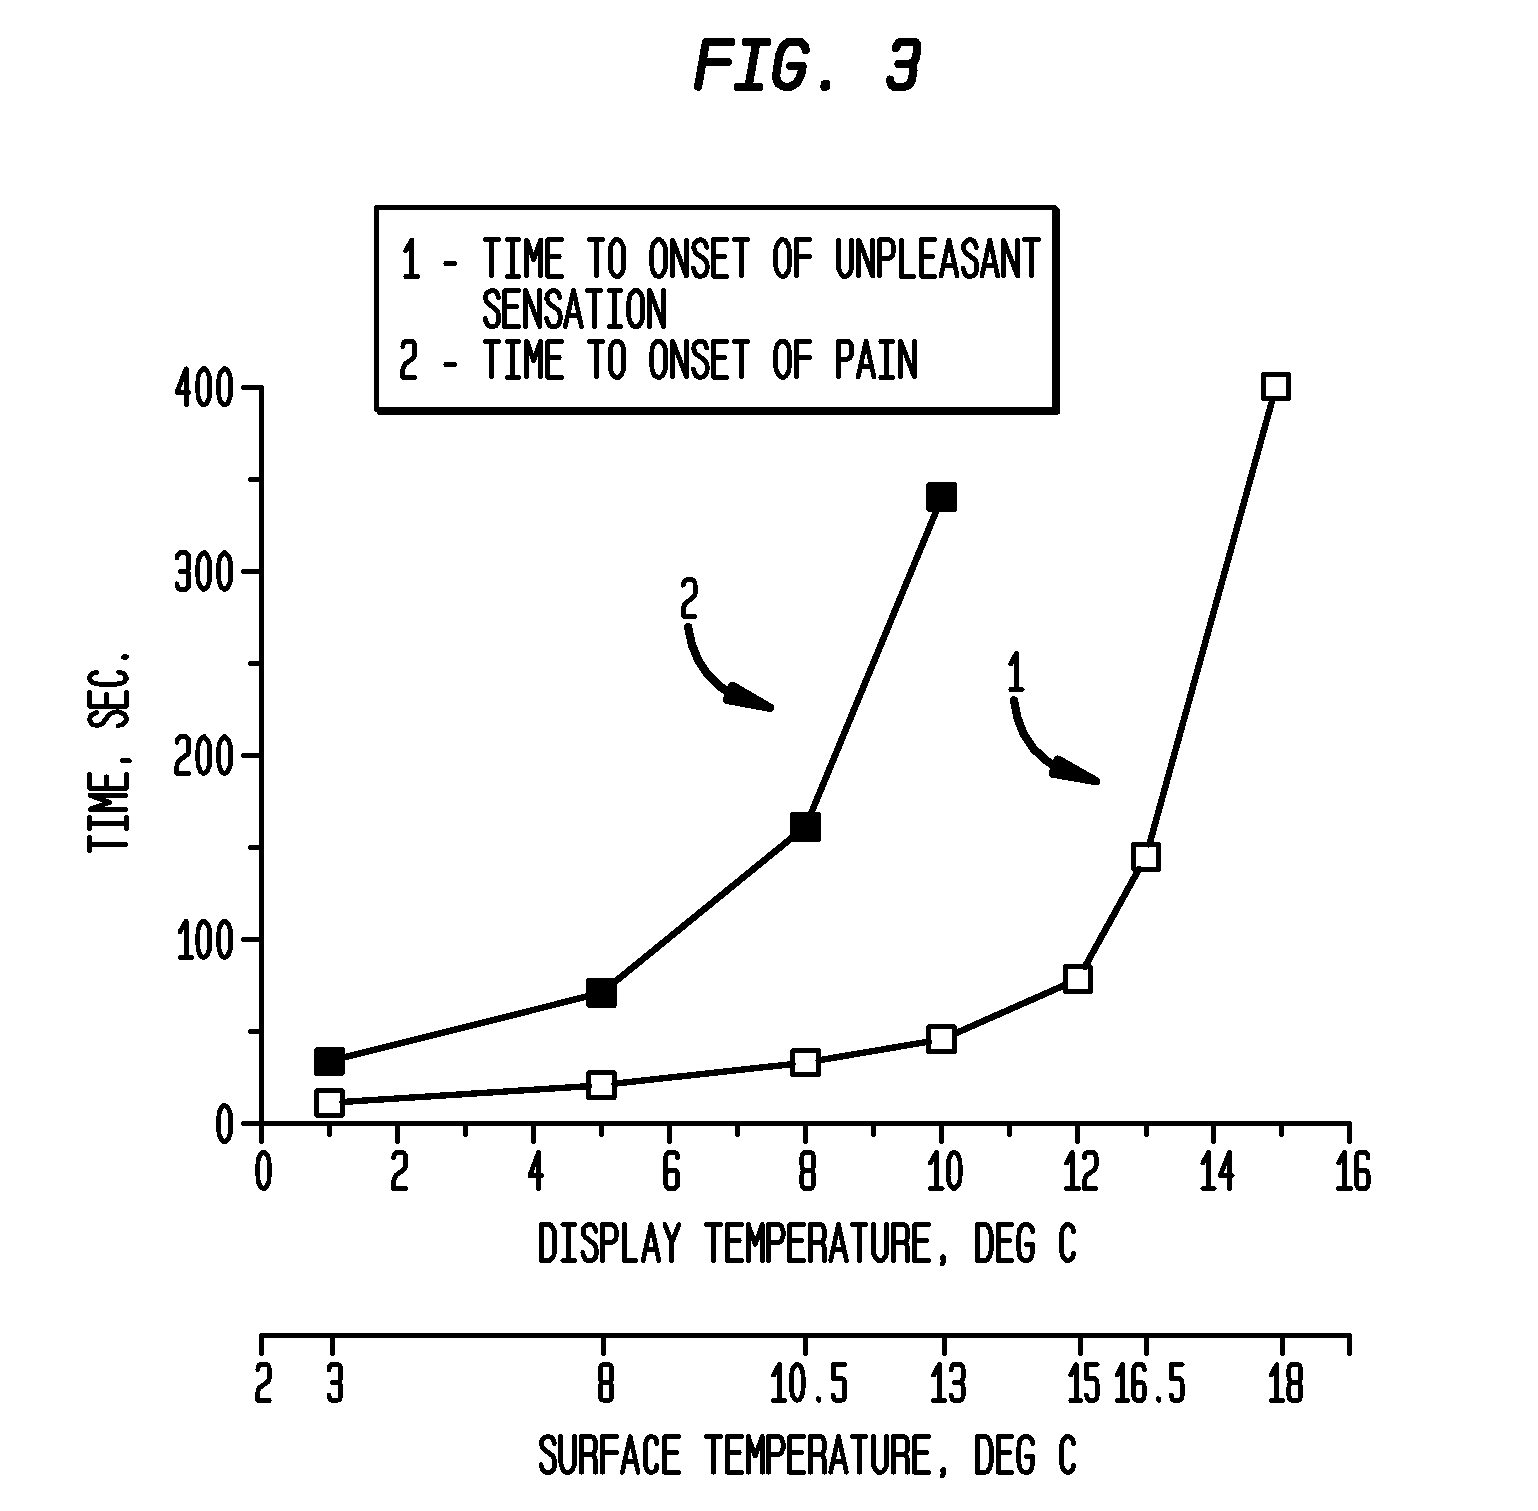 Method and apparatus for fractional deformation and treatment of cutaneous and subcutaneous tissue